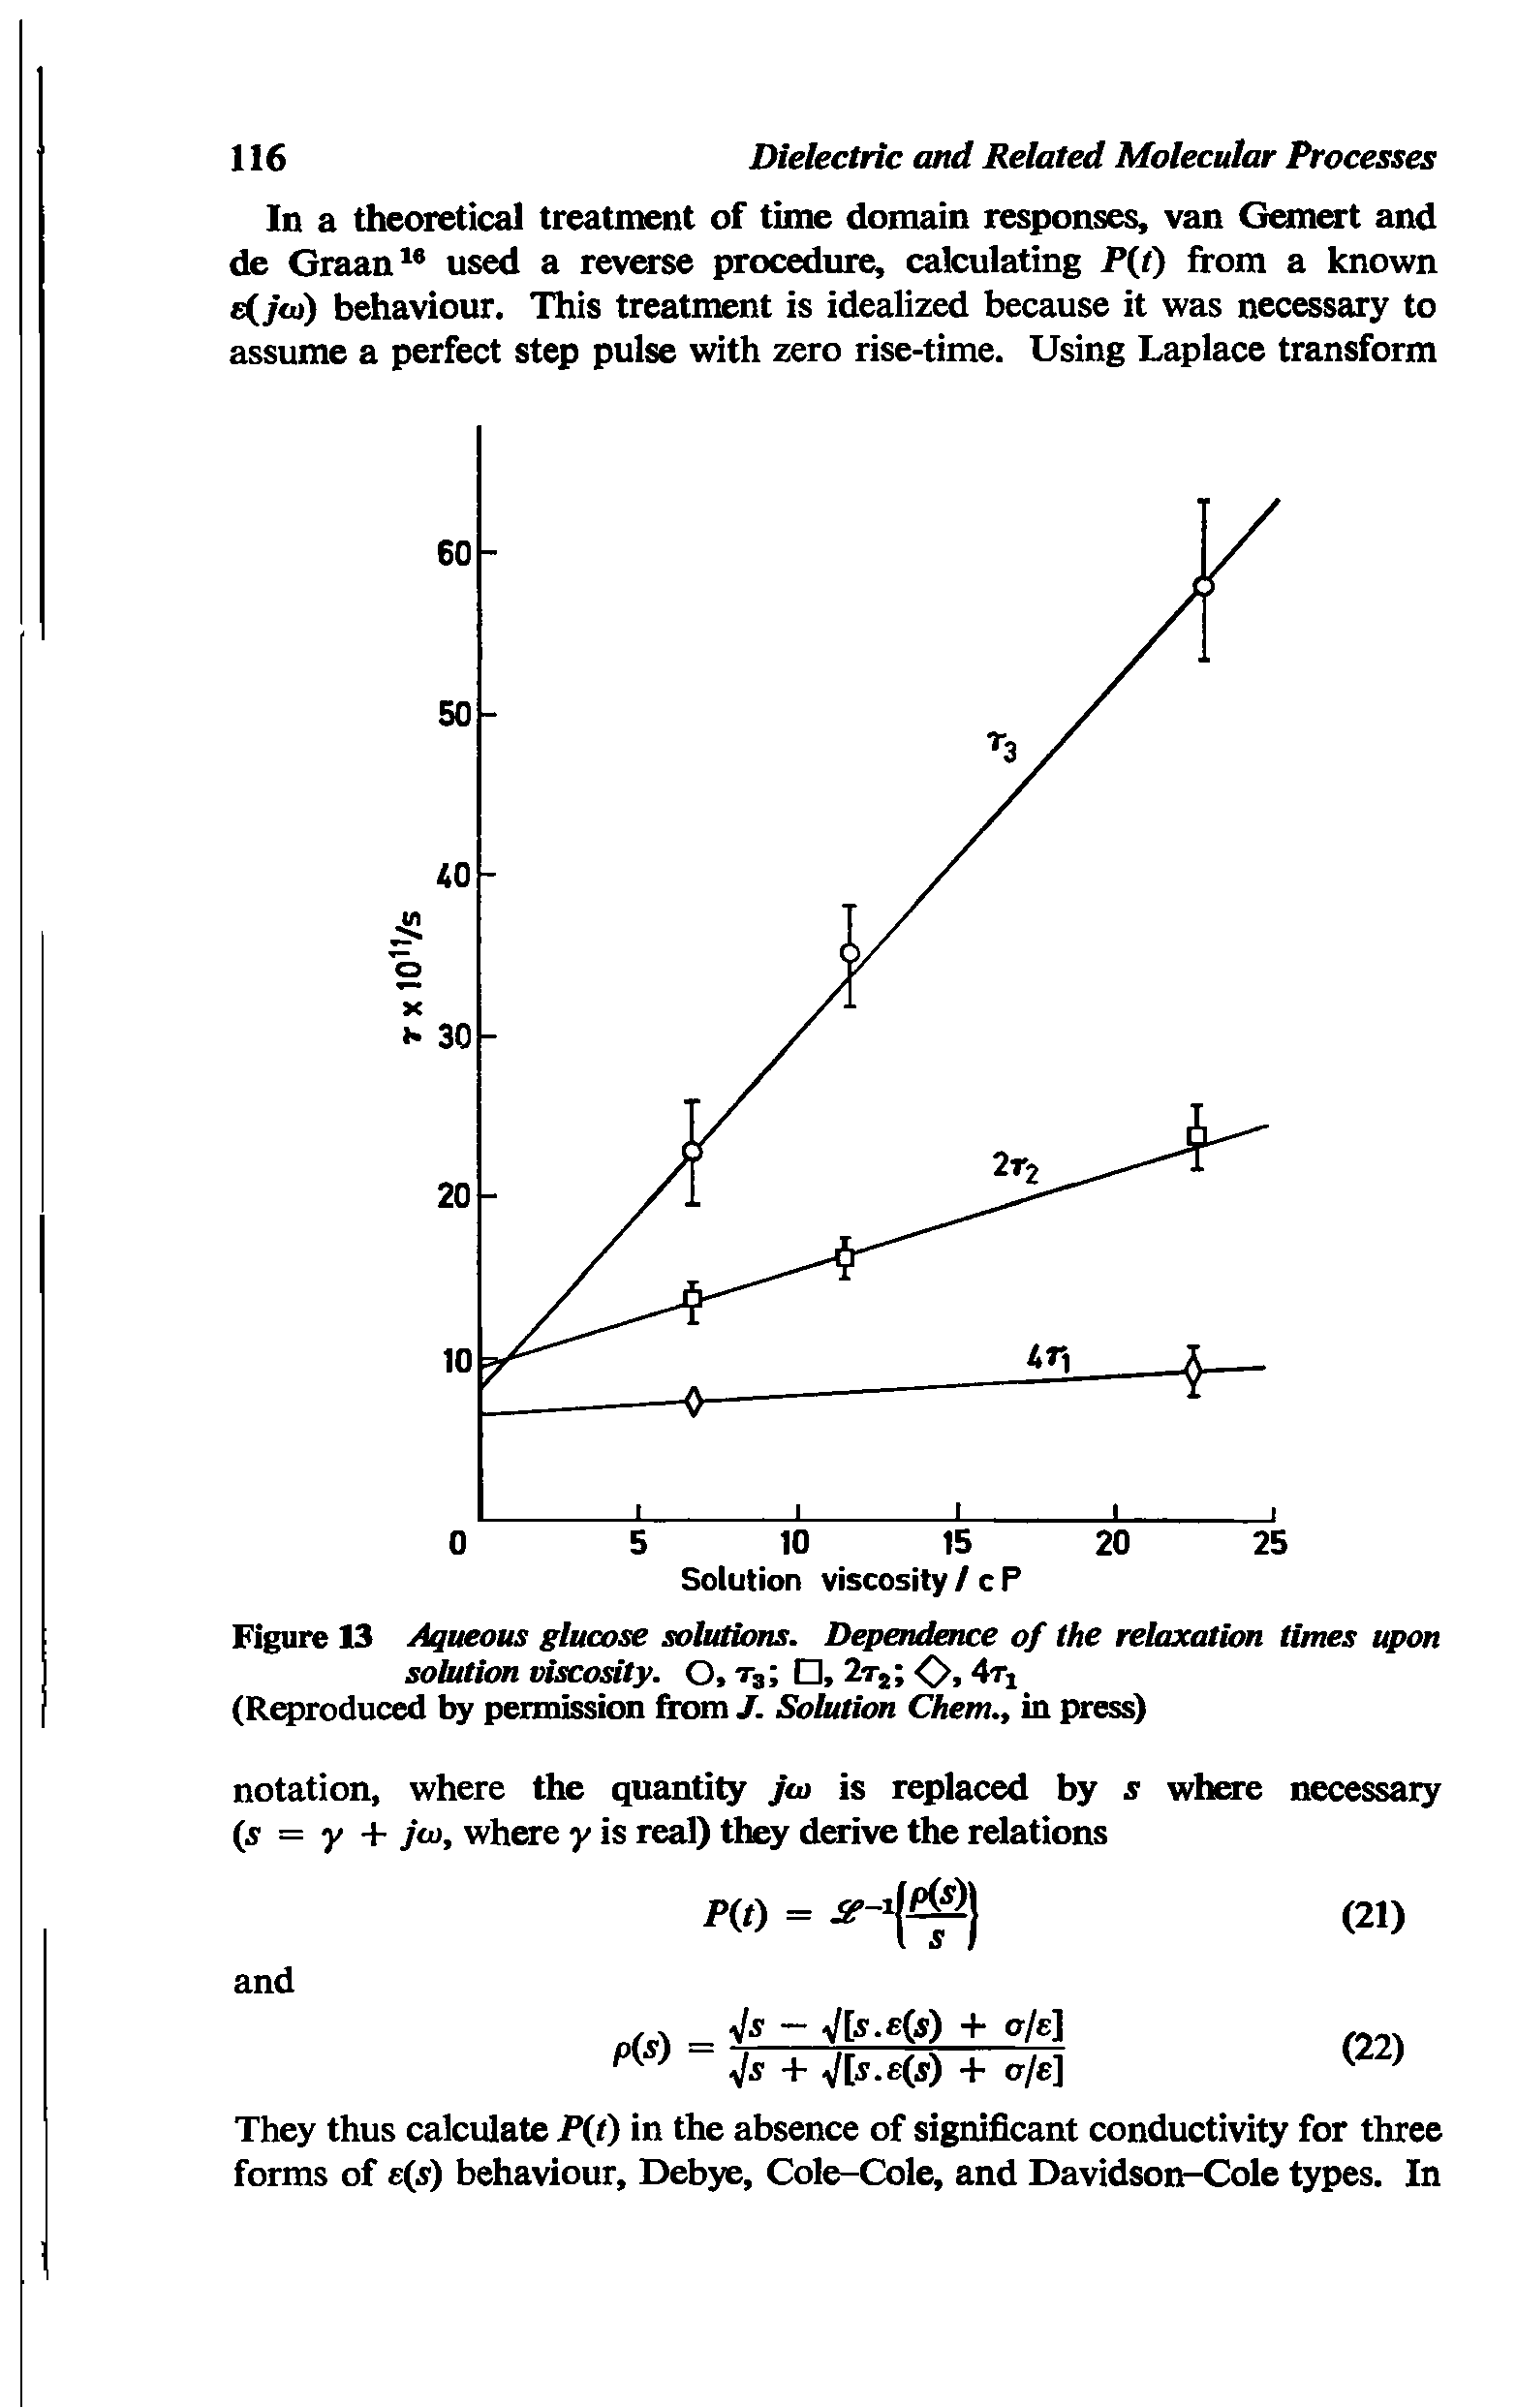 Figure 13 Aqueous glucose solutions. Dependence of the relaxation times upon solution viscosity. O, T3I , 2tj <> 4ti (R roduced by permission from J. Solution Chem., in press)...